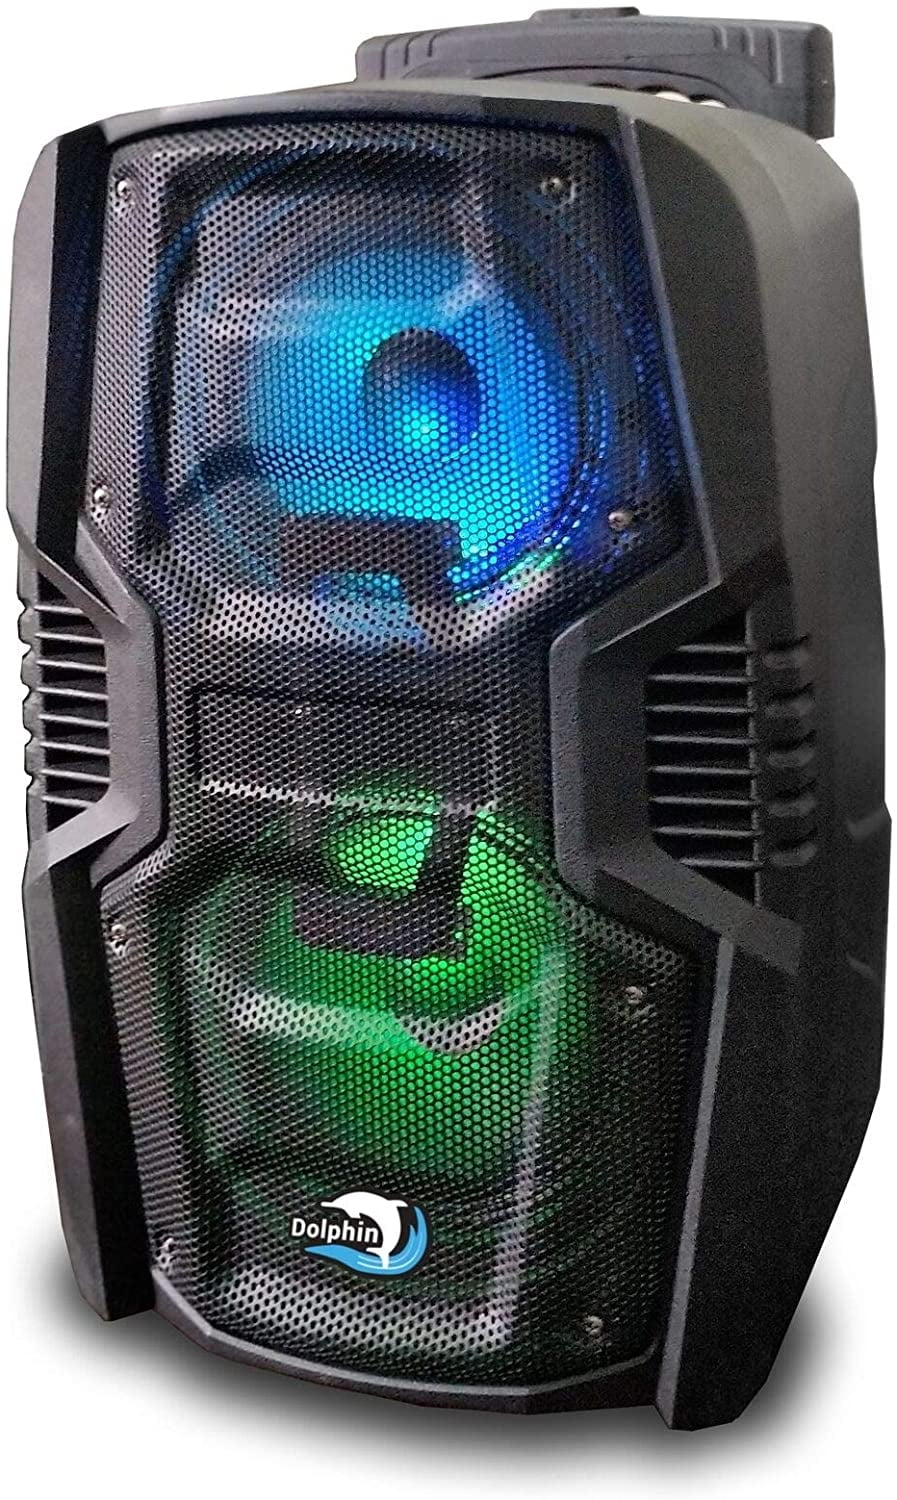 Dolphin Party Speaker SP-26RBT 1650W Portable Bluetooth Party Dual 6.5" Speaker with Sound Activated Lights and WaveSync